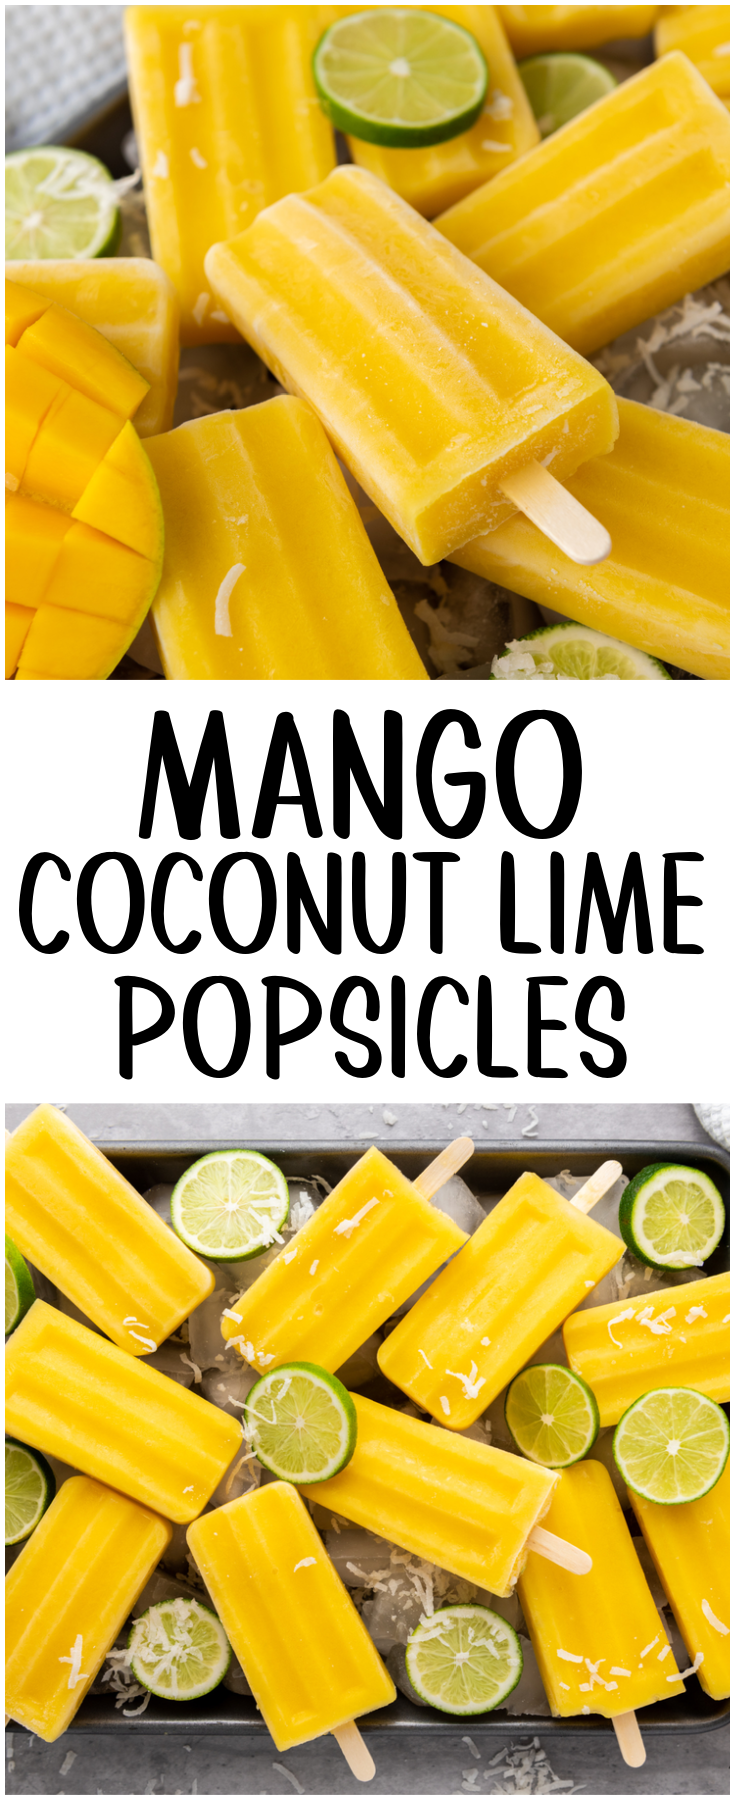 Mango Coconut Lime Popsicles that come together in mere minutes with four simple ingredients to make a treat that's absolutely out of this world delicious!  #mango #coconut #lime #popsicles #healthy #vegan #summer